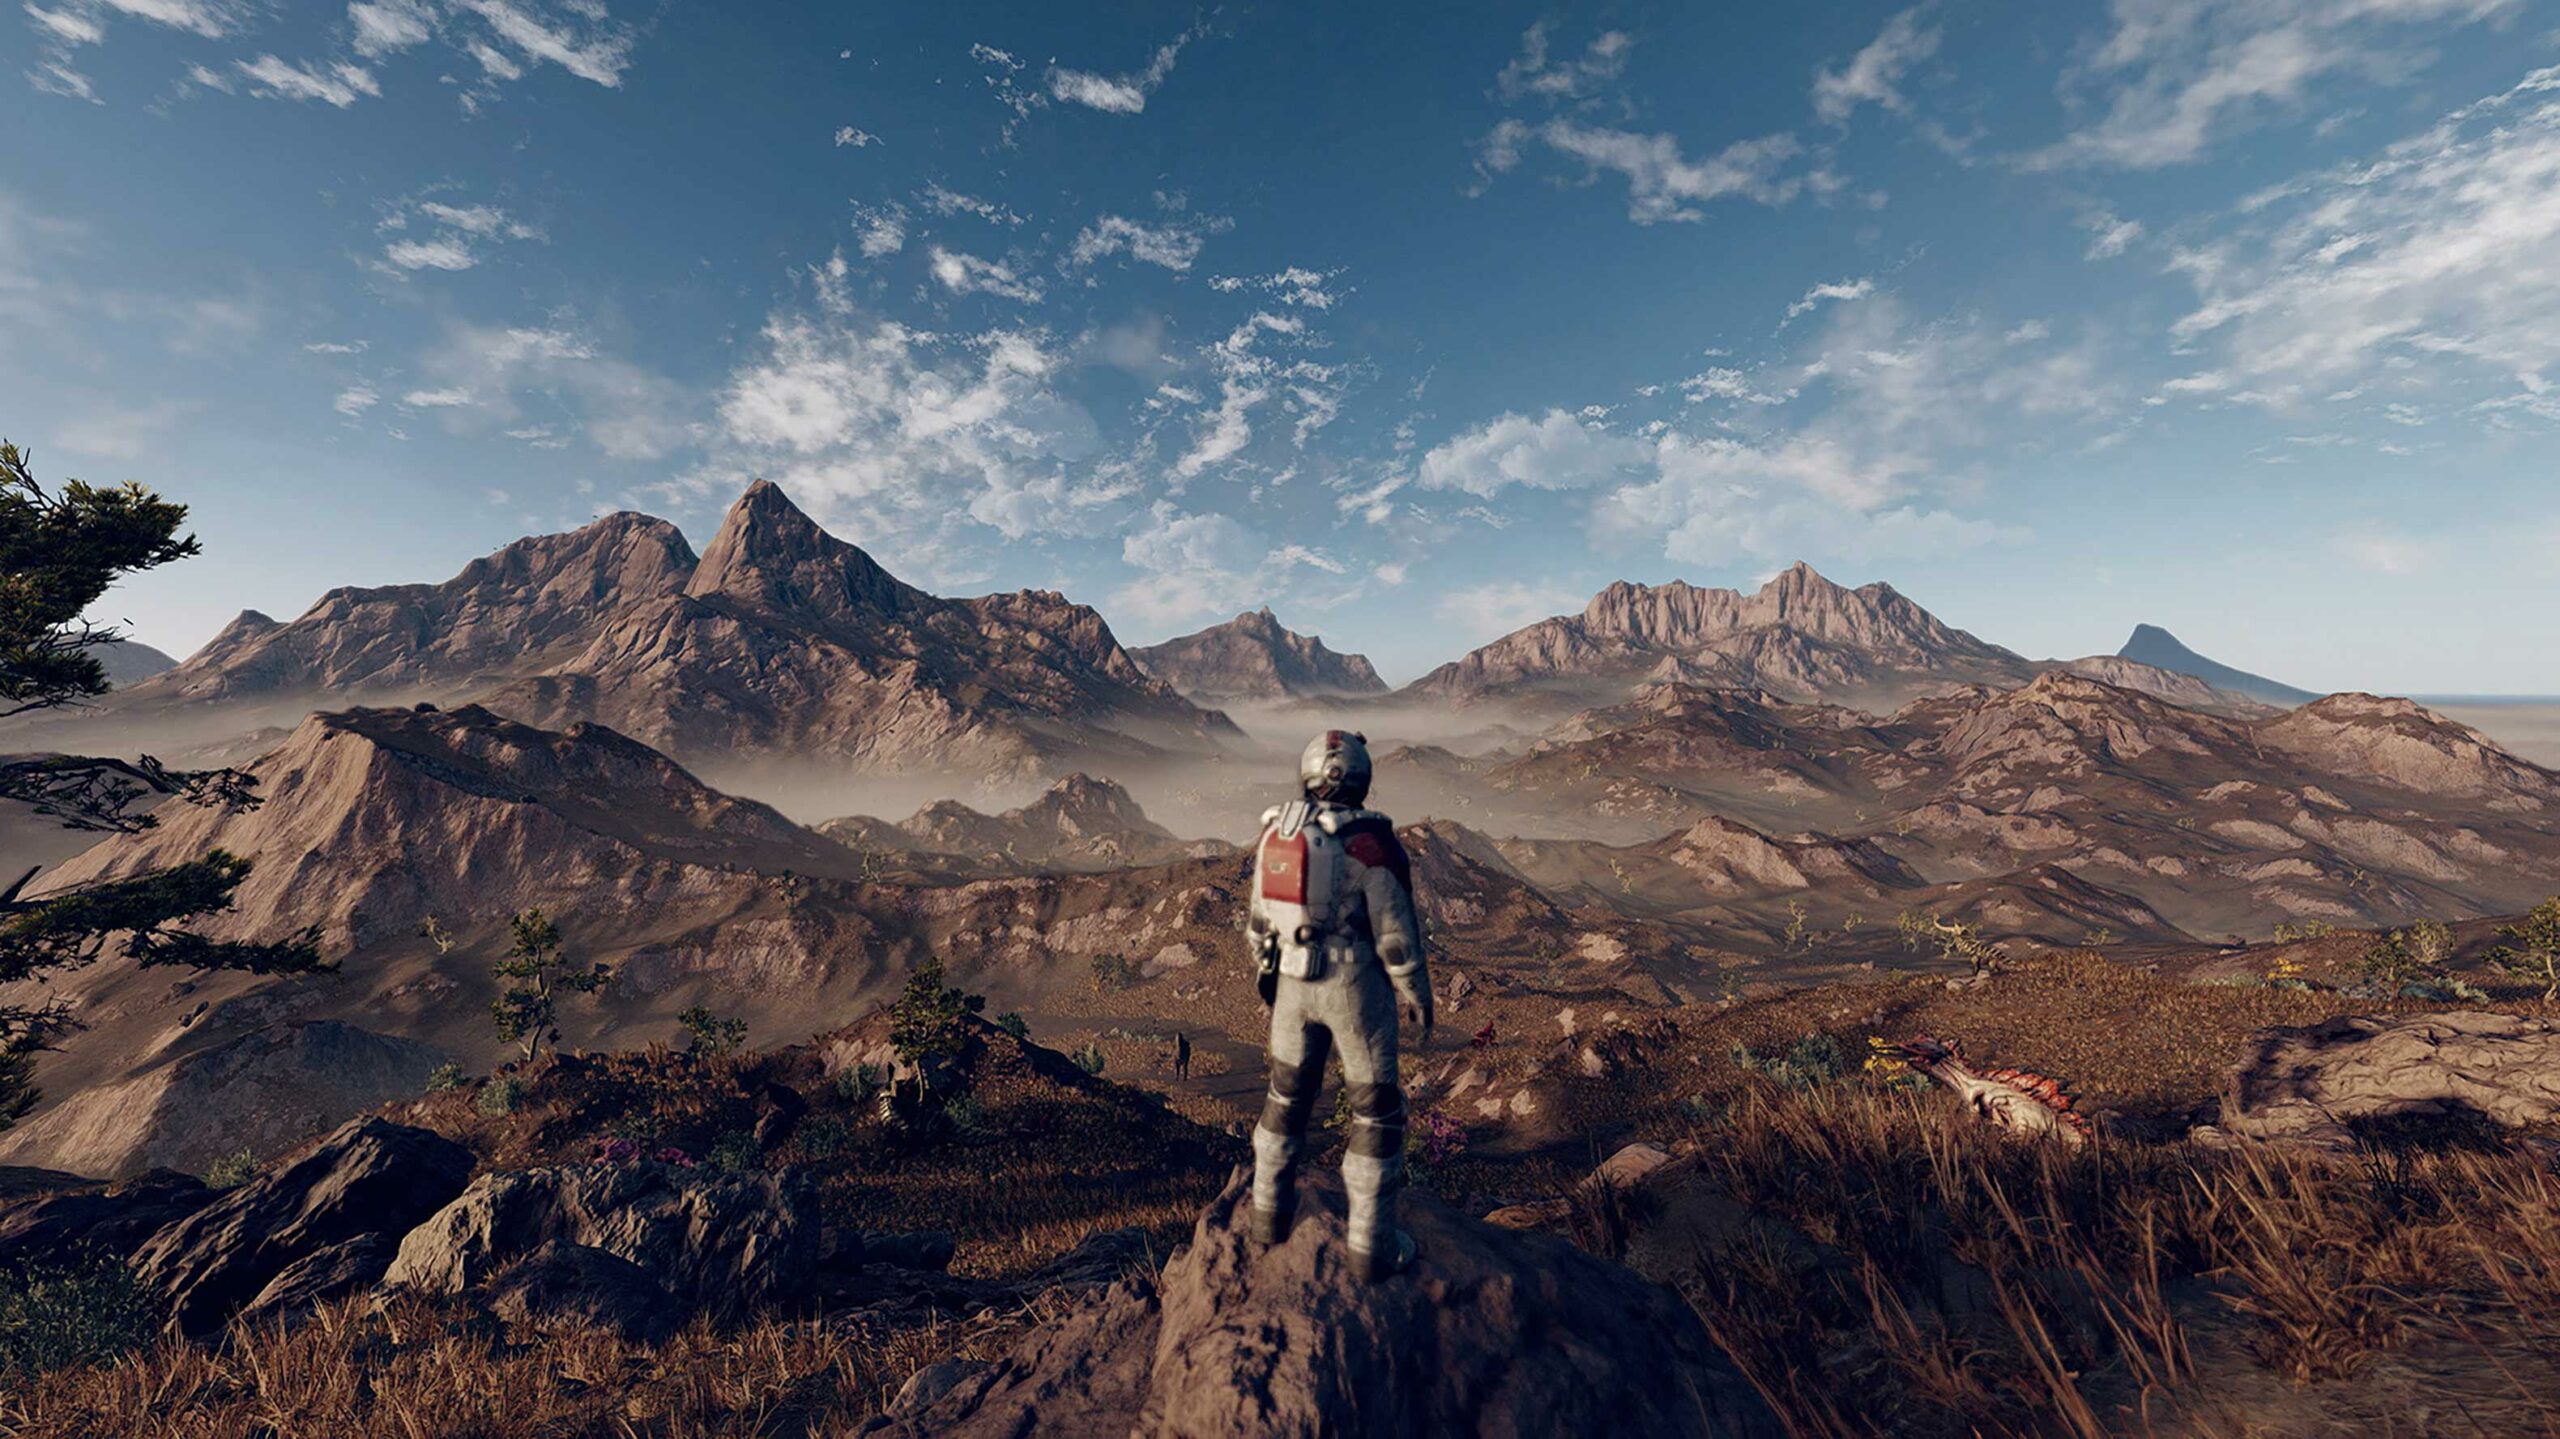 Screenshot from Xbox's Starfield. A man in a space suit stares out onto a planet's vast and empty surface, with many hills visible in the distance.